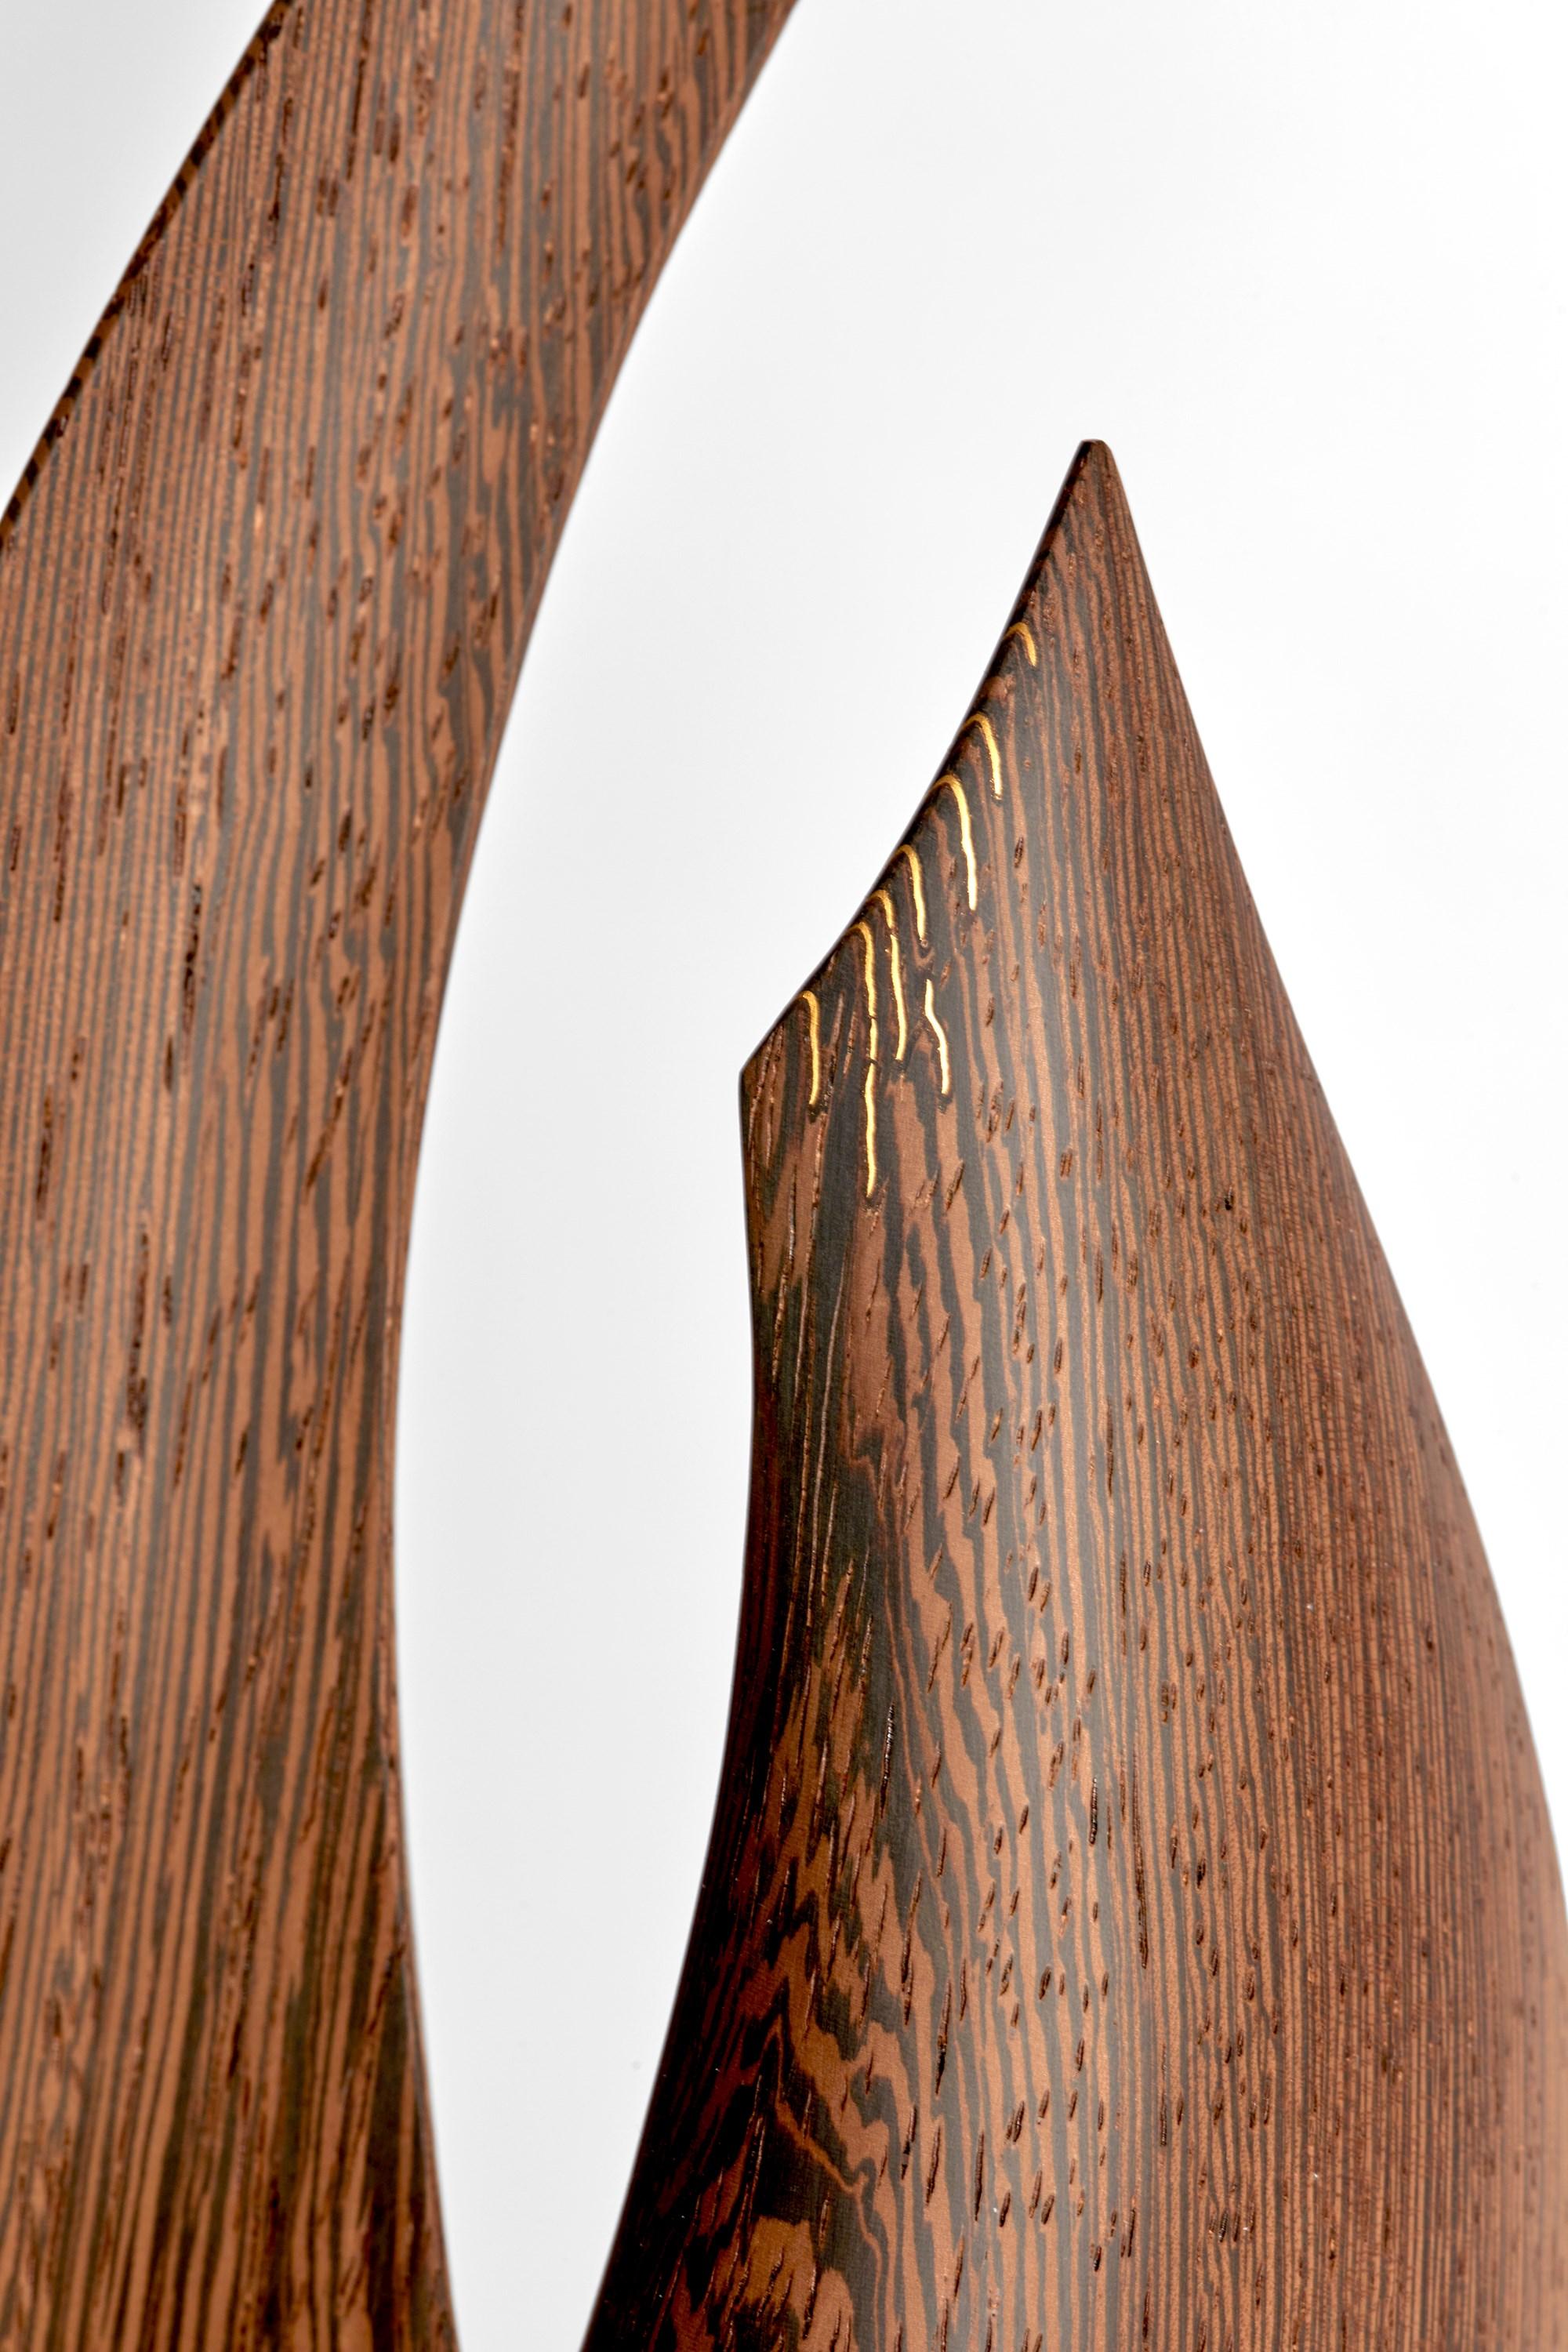 Contemporary Flow Petit No 19, Wenge wood & gold mid-century inspired sculpture by Egeværk For Sale